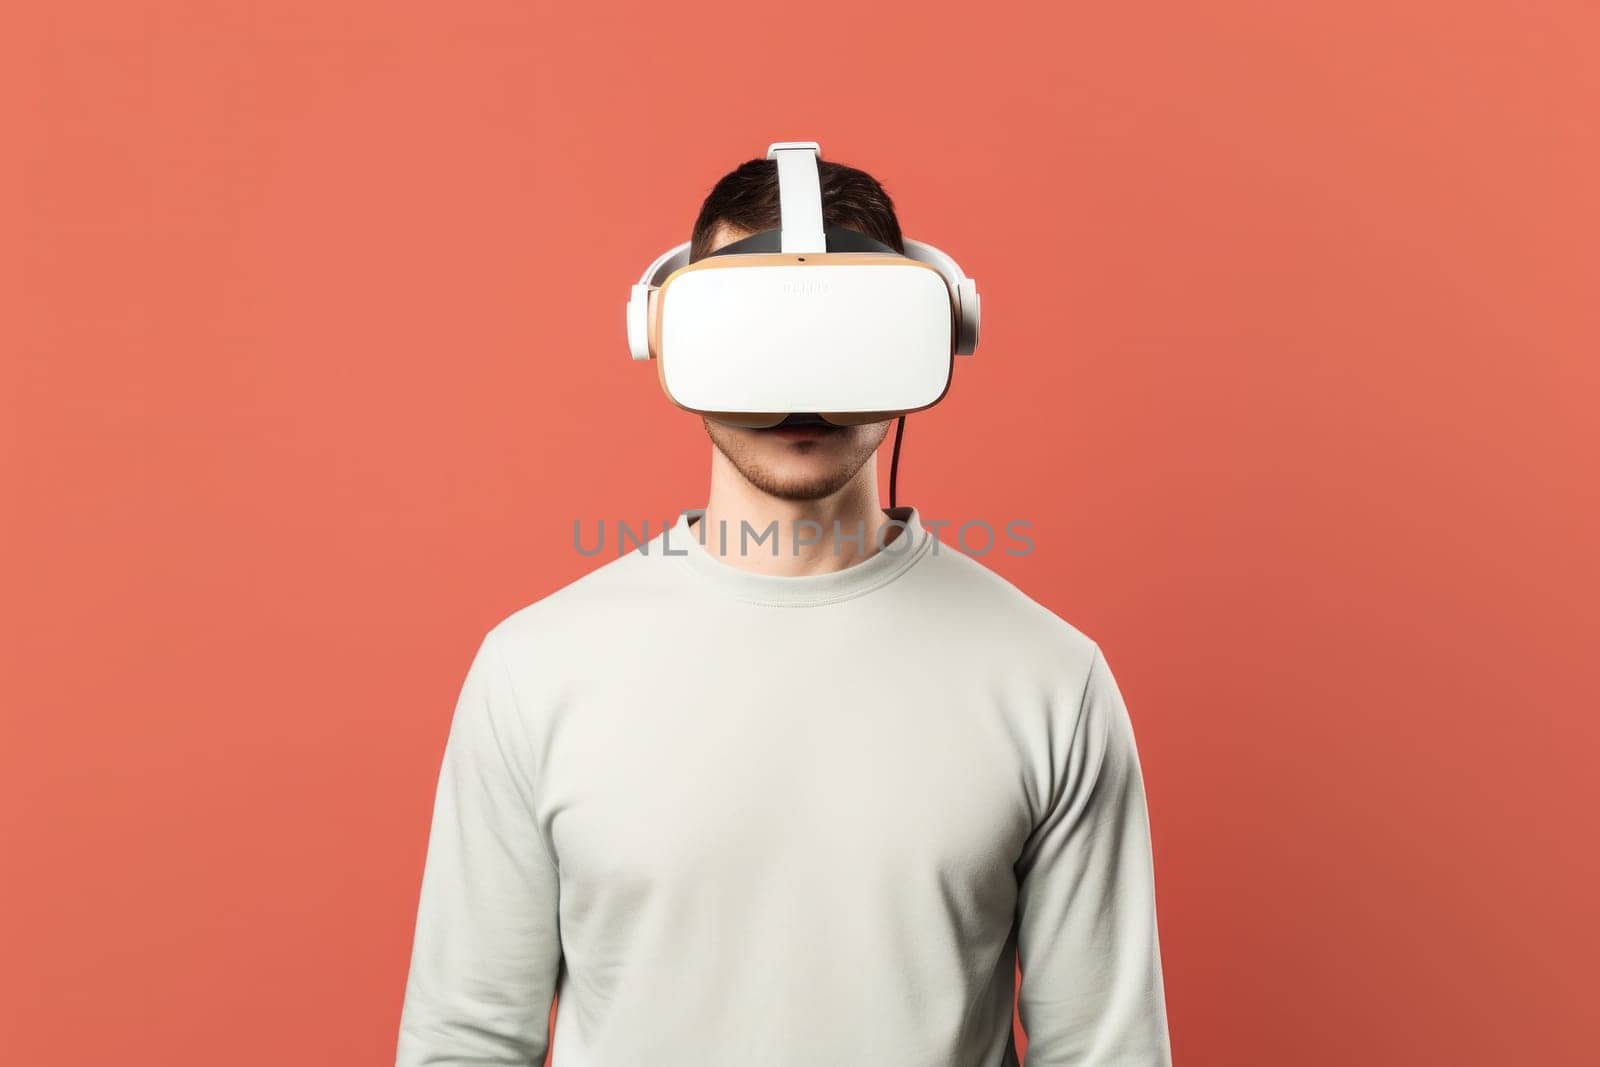 A man wearing a virtual reality headset against a red background